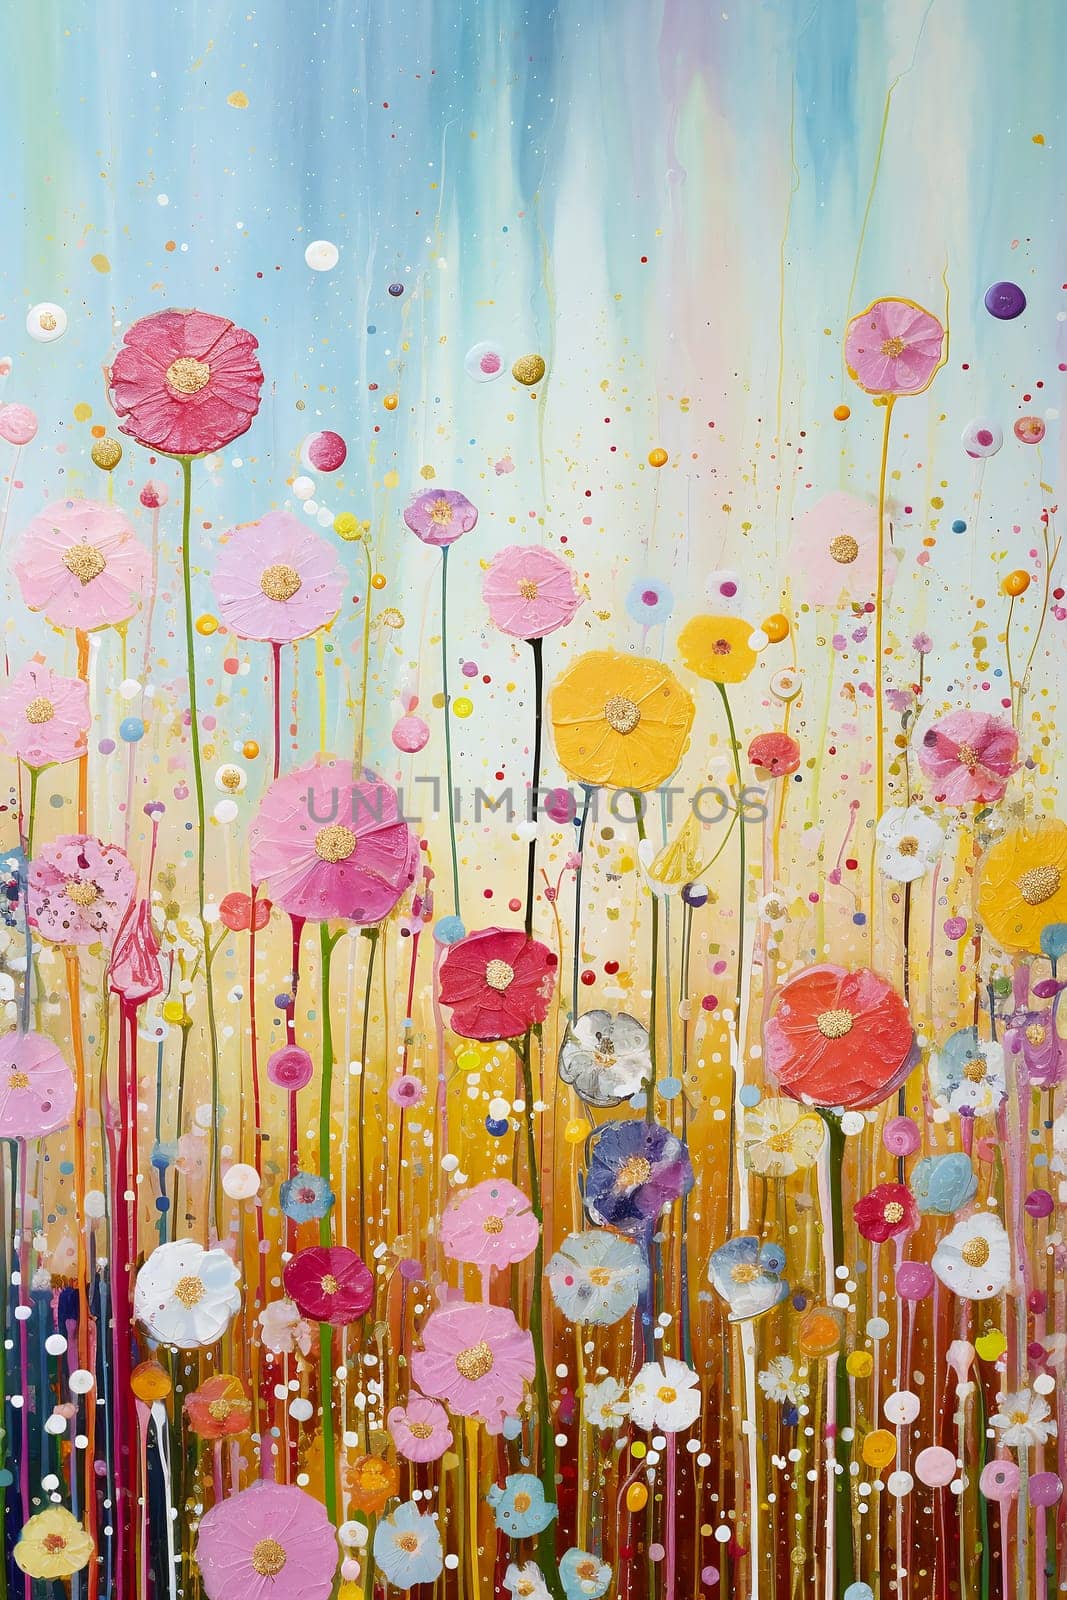 A vibrant, abstract painting featuring a field of colorful flowers, infused with a sense of springs's joyful essence by chrisroll